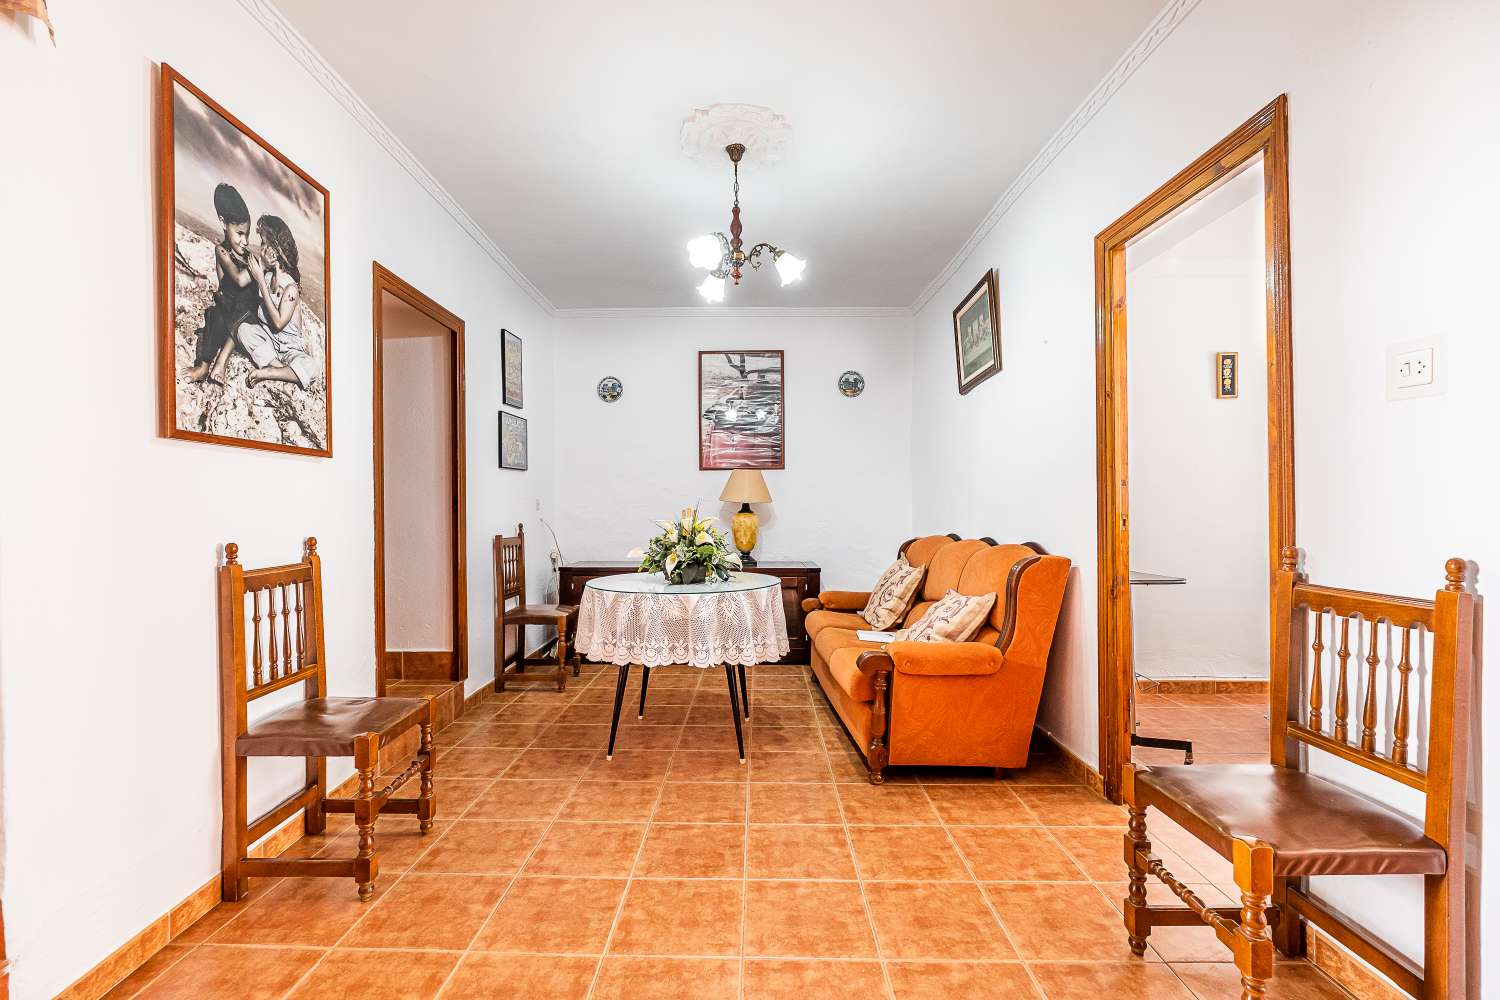 Traditional Andalusian town house in Riogordo